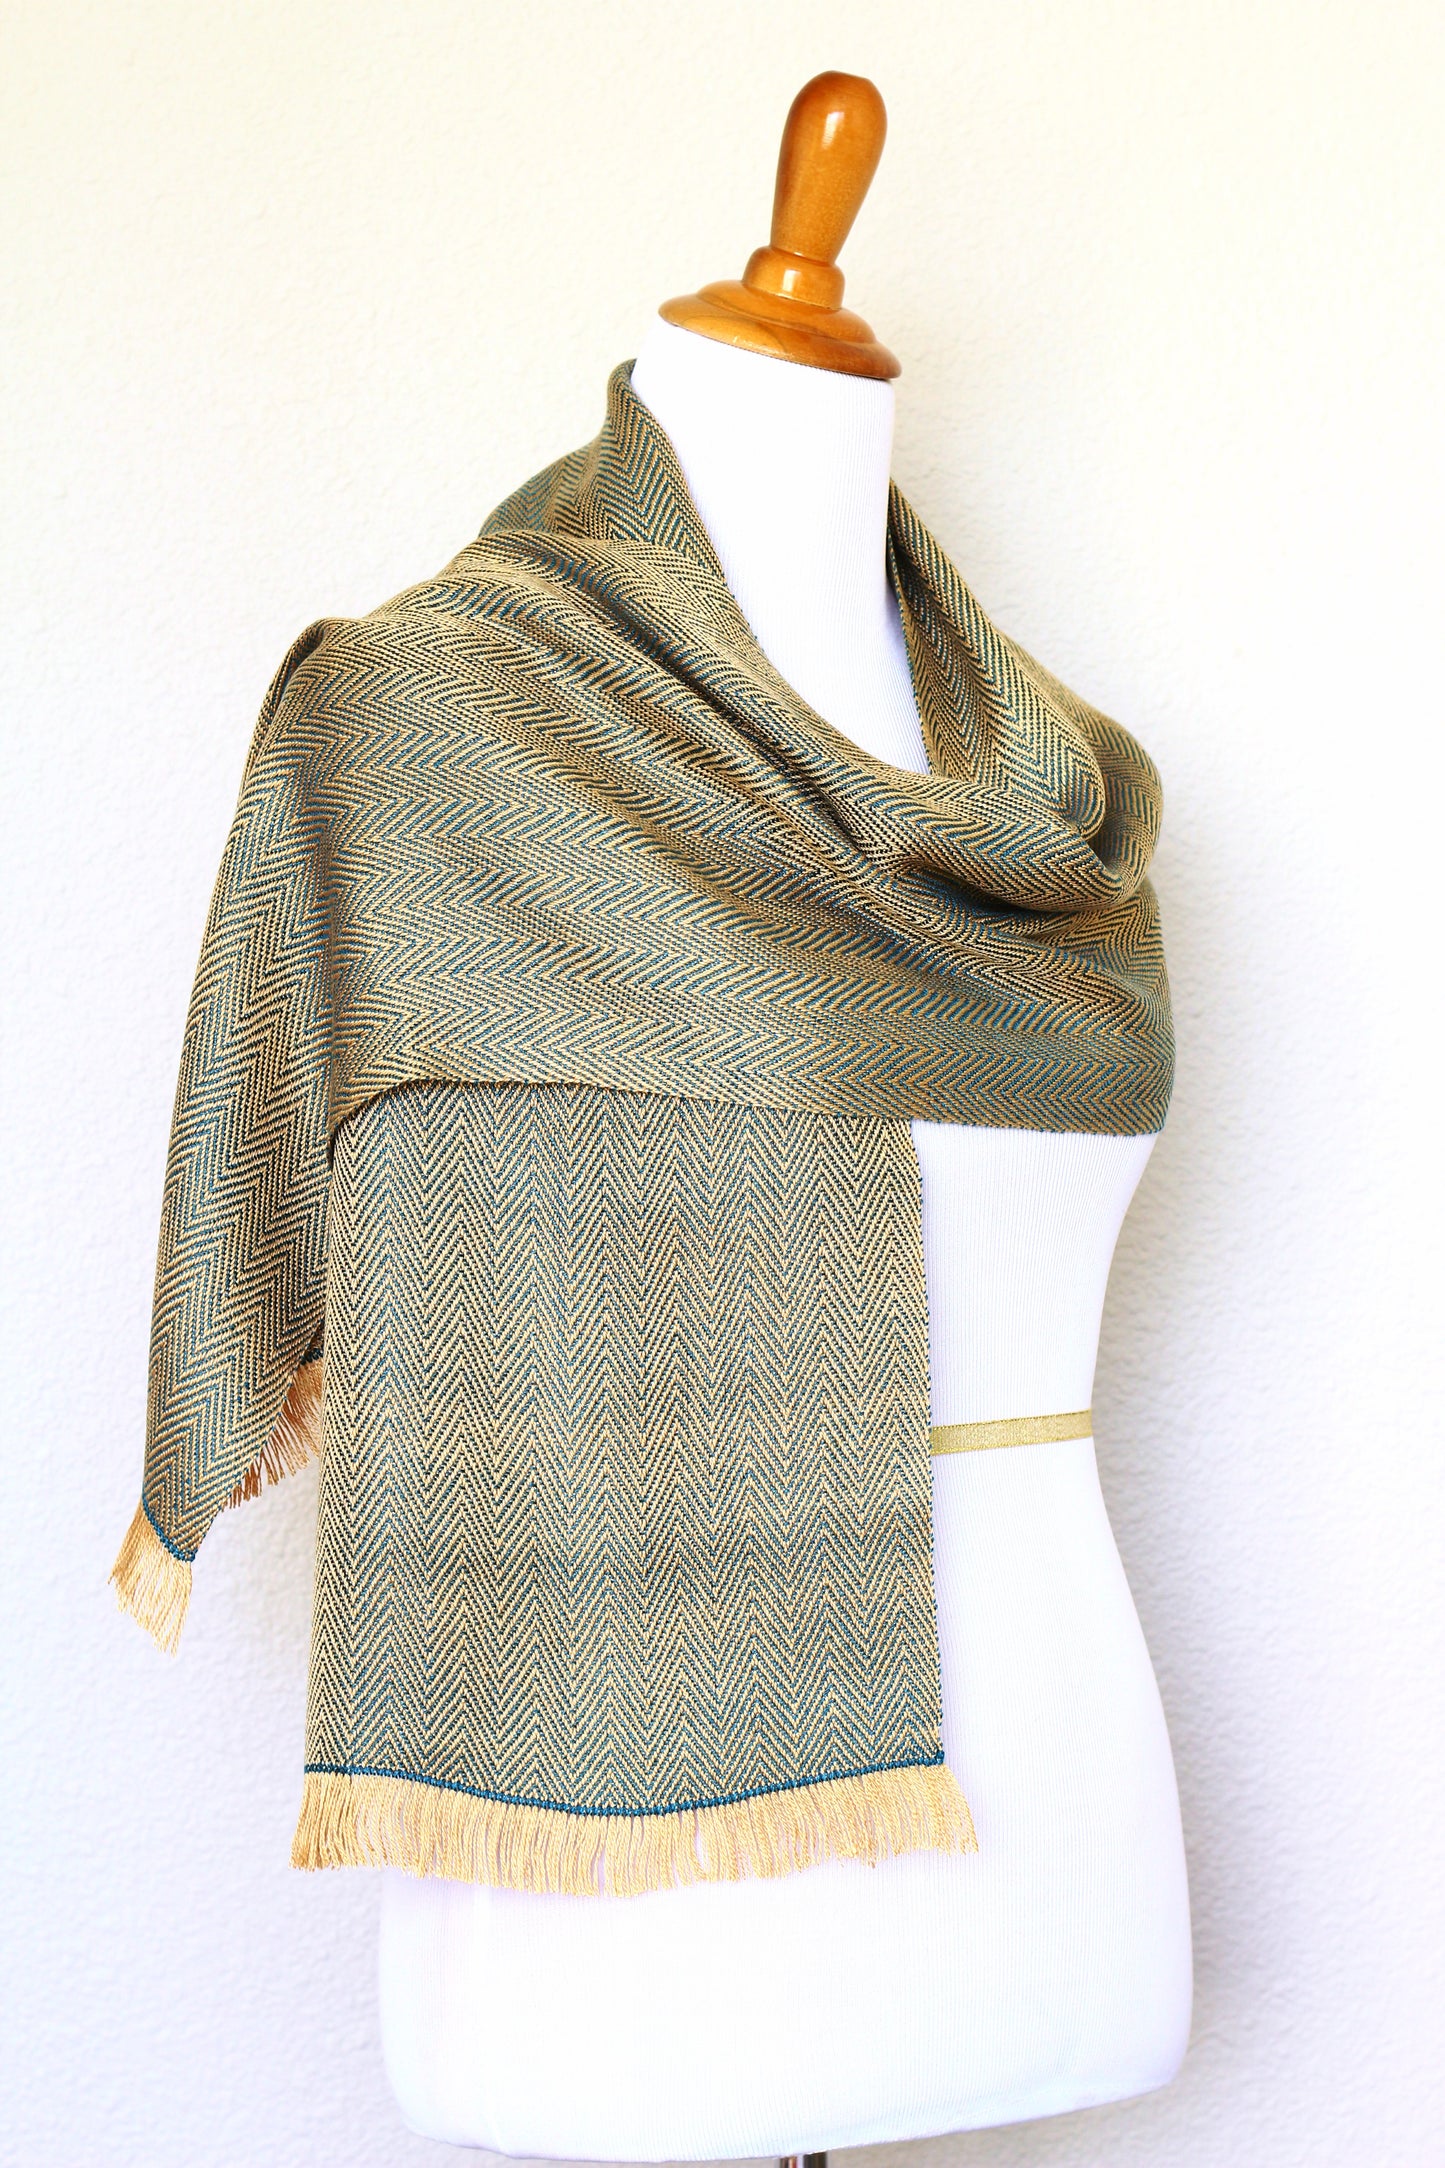 Woven scarf in gold and teal colors with twill pattern, Eucalyptus scarf with fringe